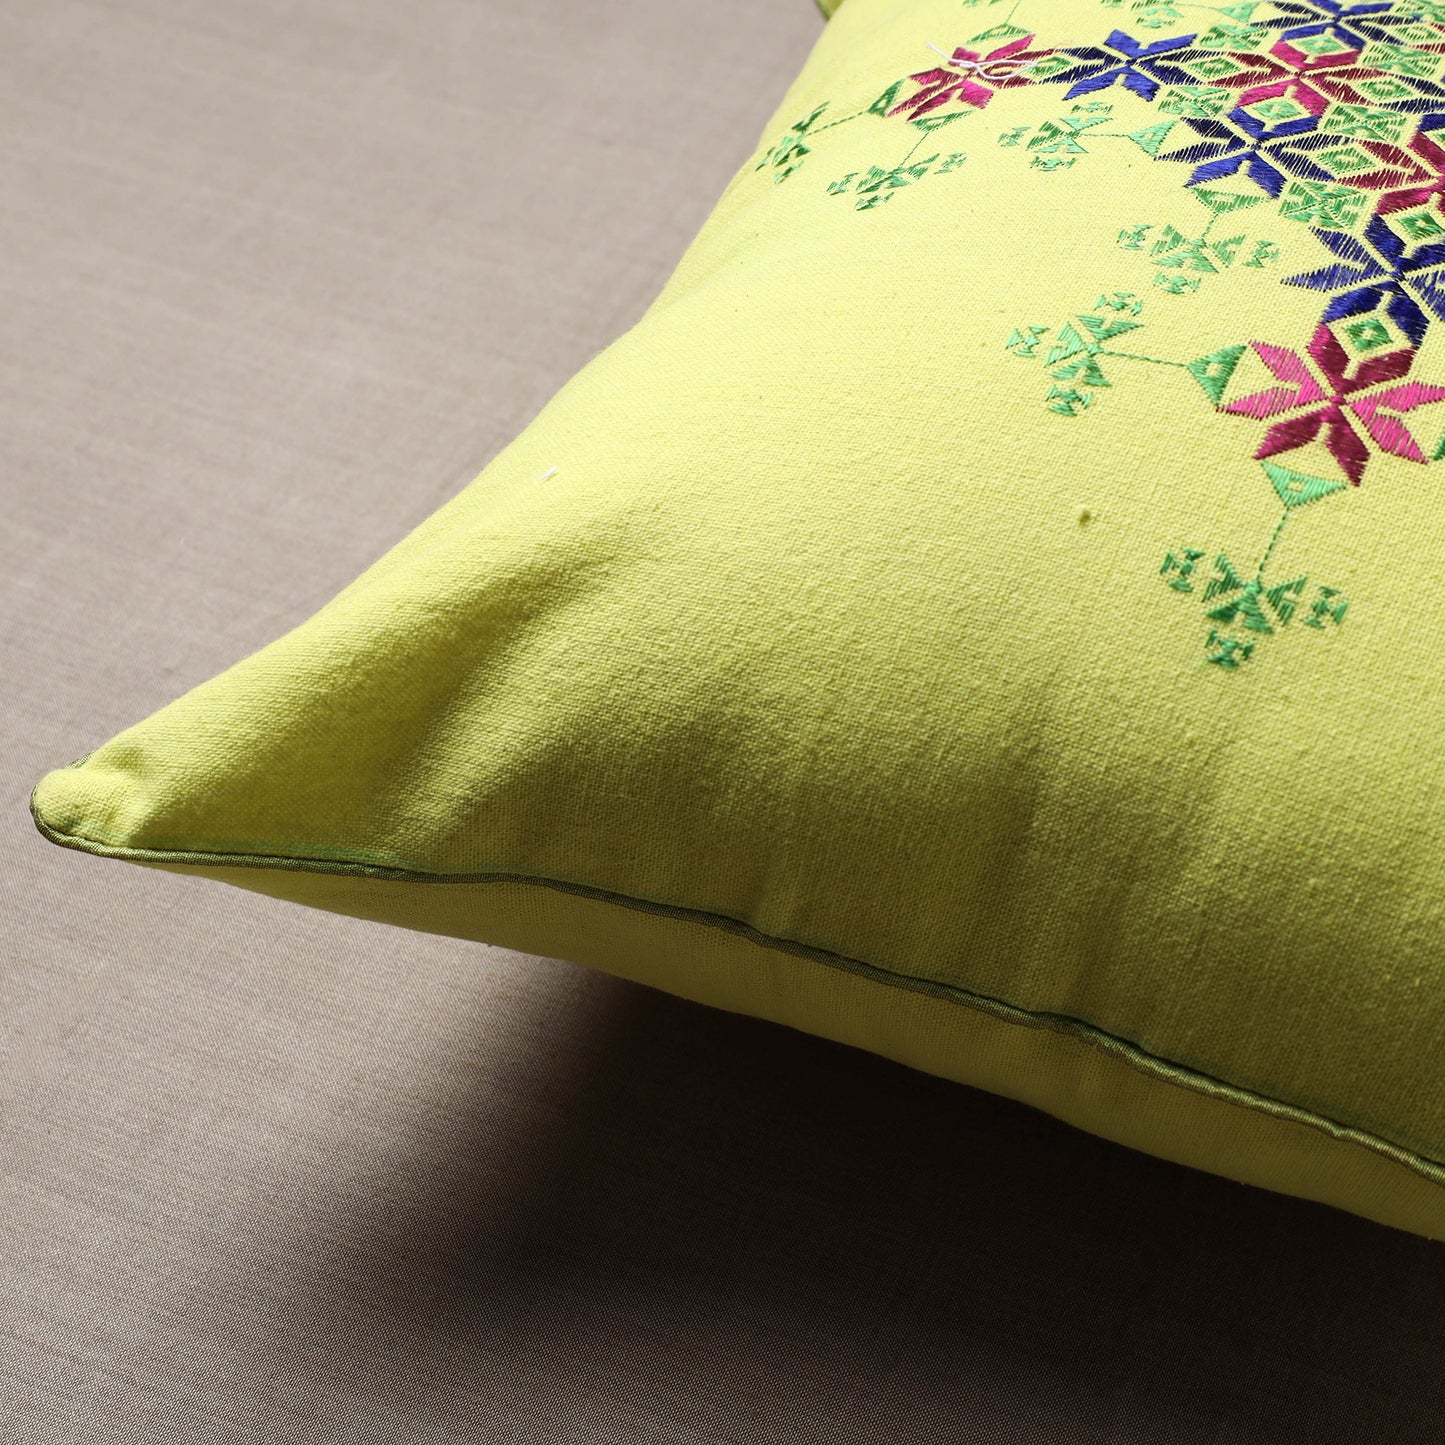 Green - Soof Embroidery Cotton Cushion Cover (16 x 16 in)